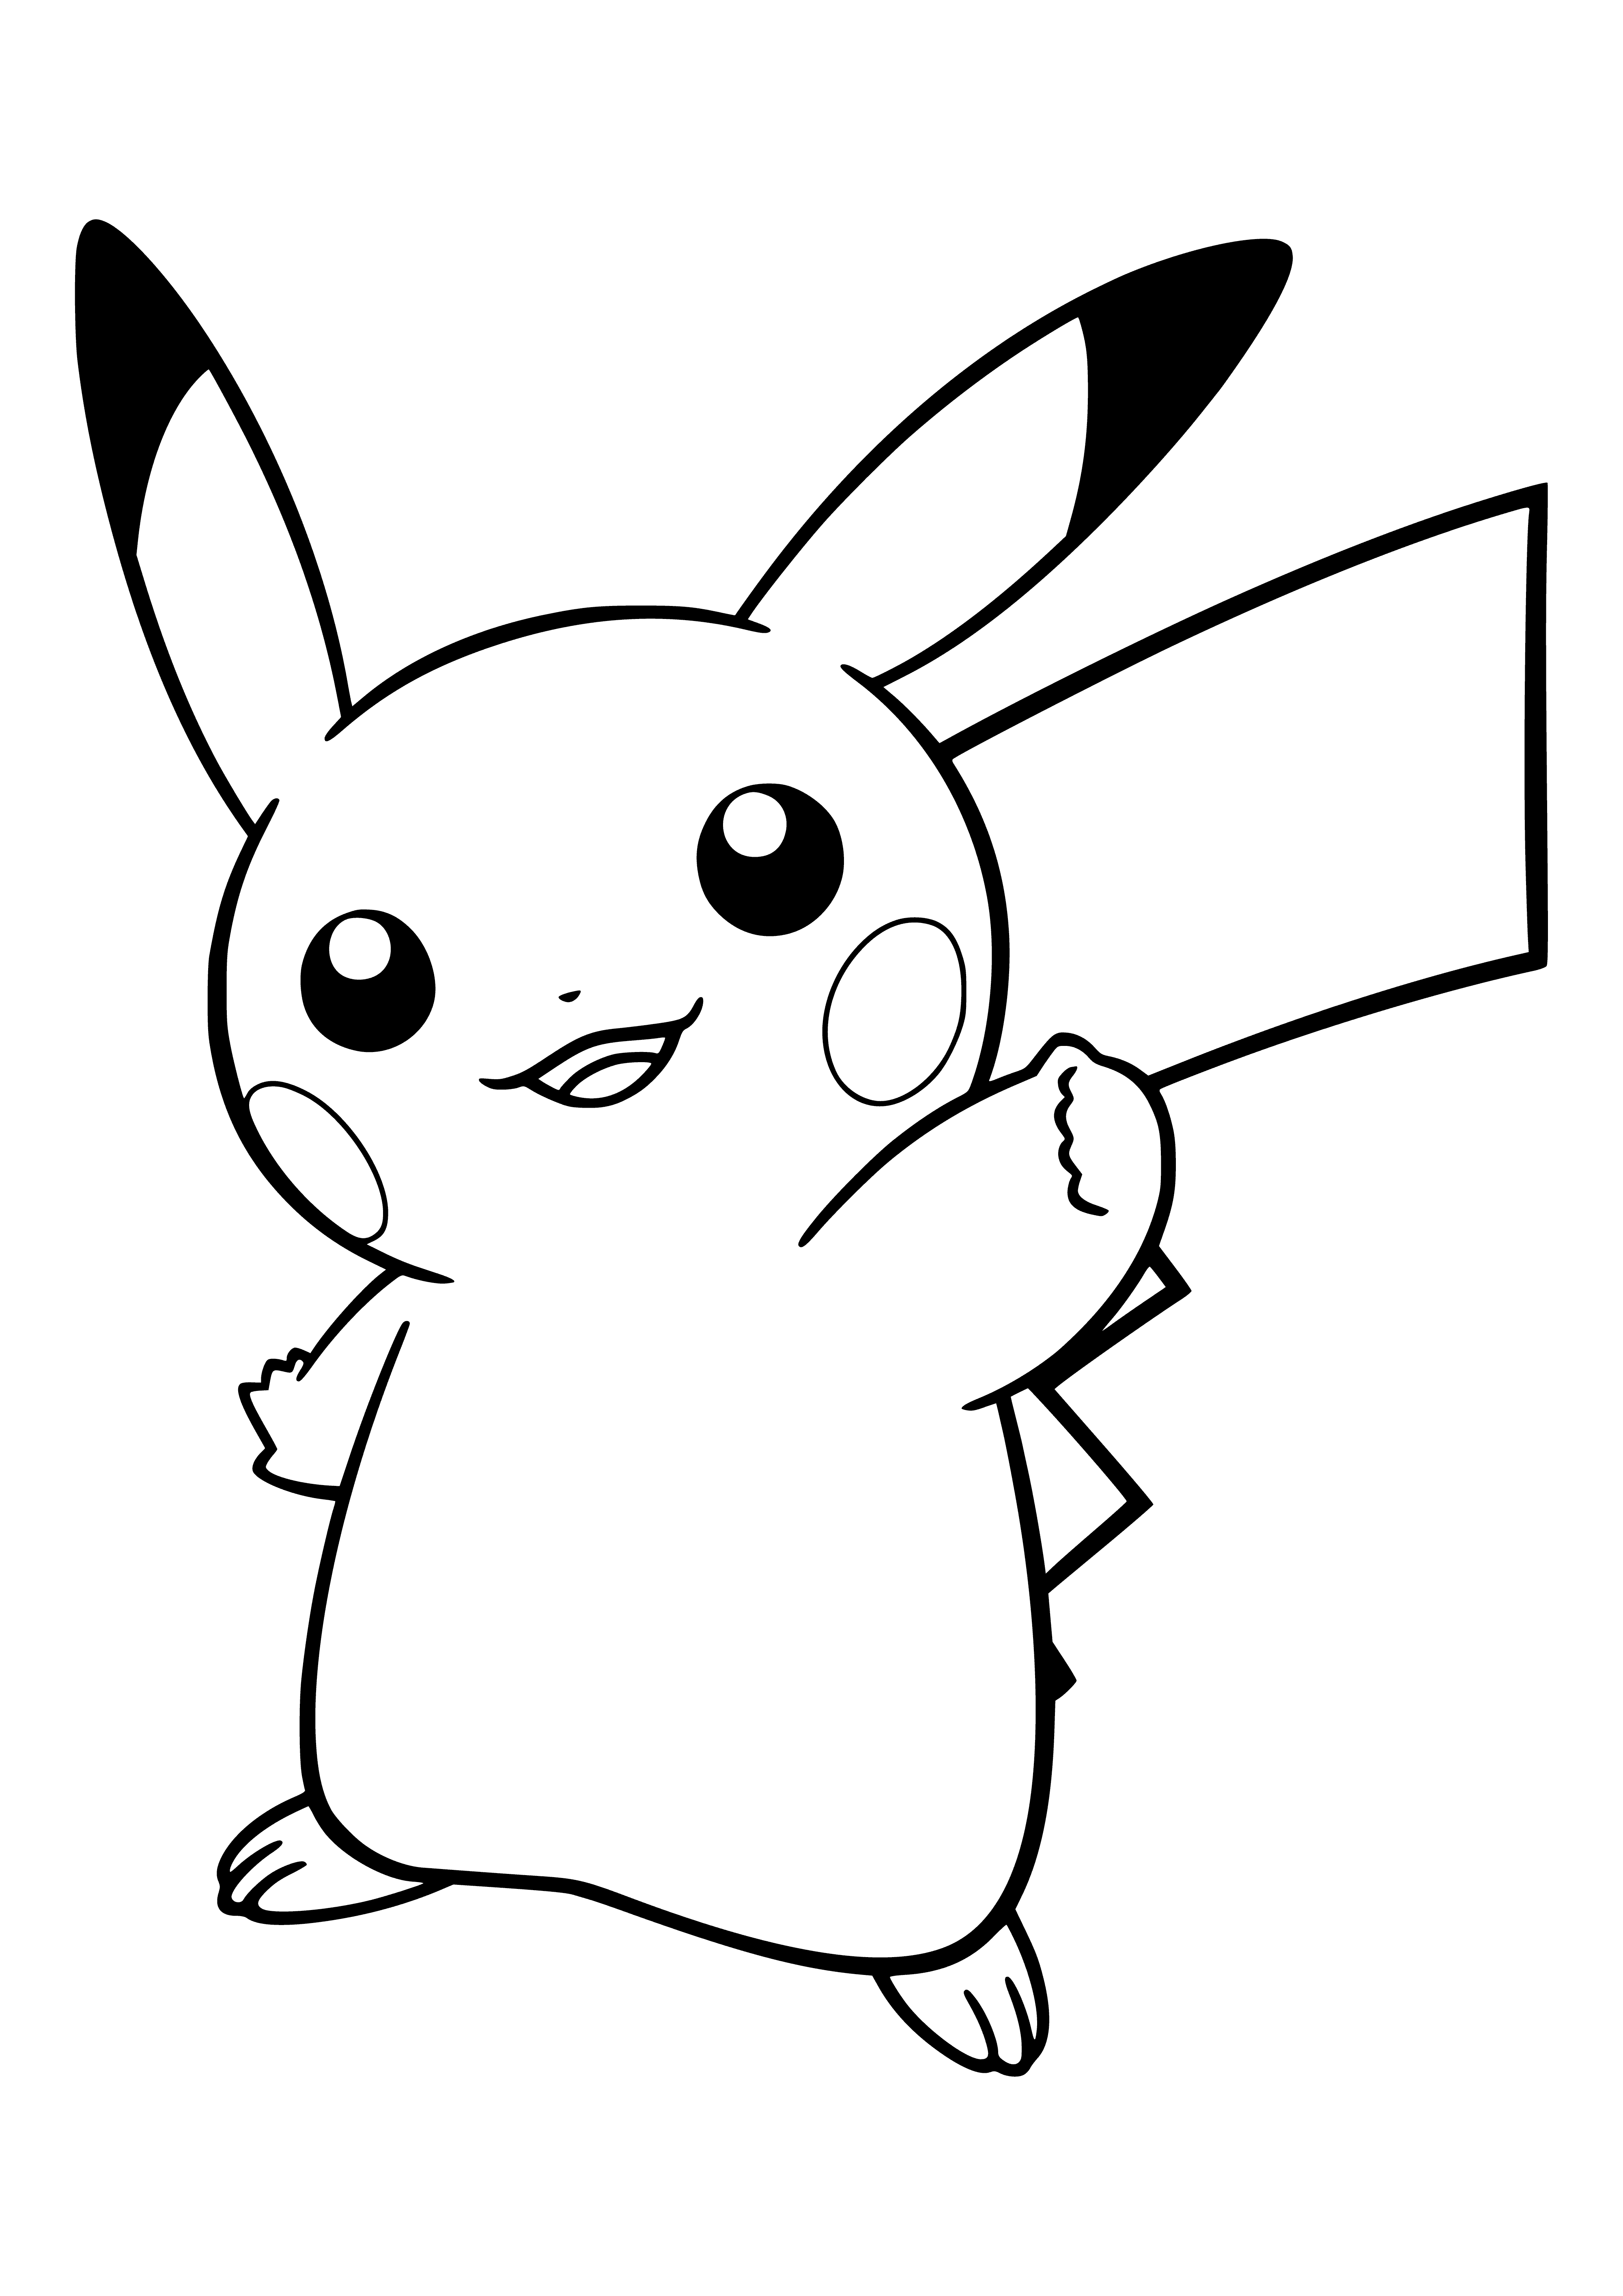 coloring page: A cute, yellow Pokémon with black stripes, a lightning bolt tail and red eyes. Often found evolving from Pichu, Pikachu is known for its electric charges from its cheeks when it's ready to fight.